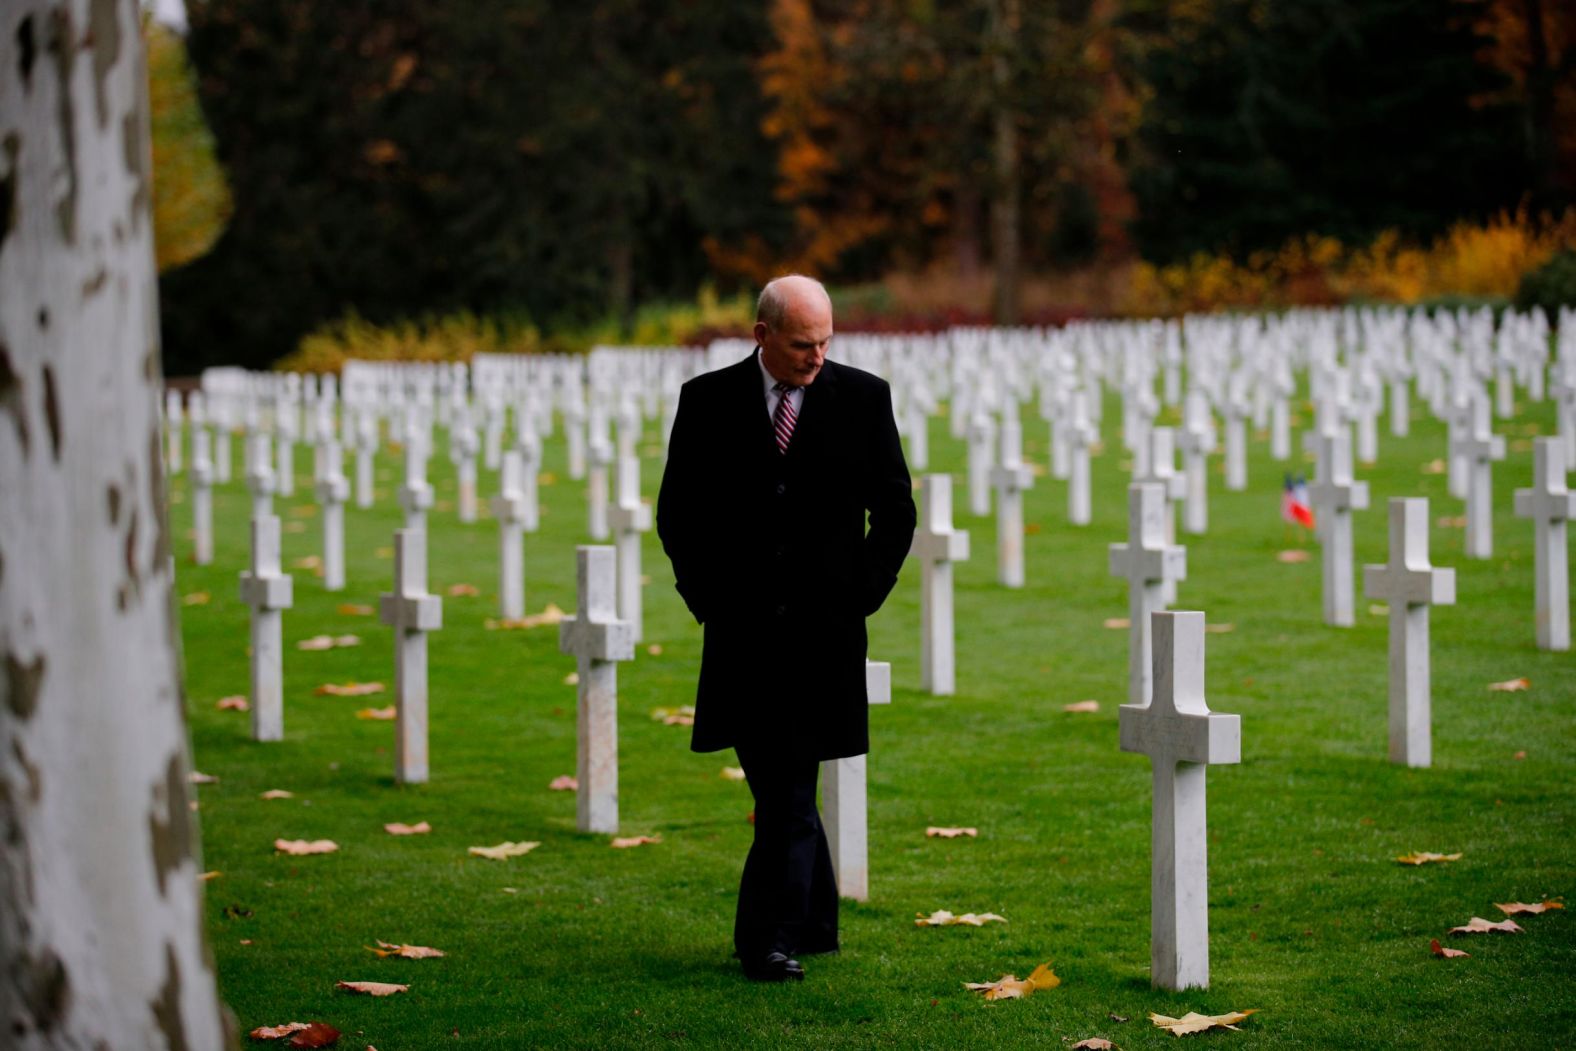 White House Chief of Staff John Kelly visits the Aisne Marne American Cemetery near the Belleau Wood battleground, in Belleau, France, on November 10. US troops had their breakthrough battle at Belleau Wood, stopping a German push for Paris shortly after entering the war in 1917. 